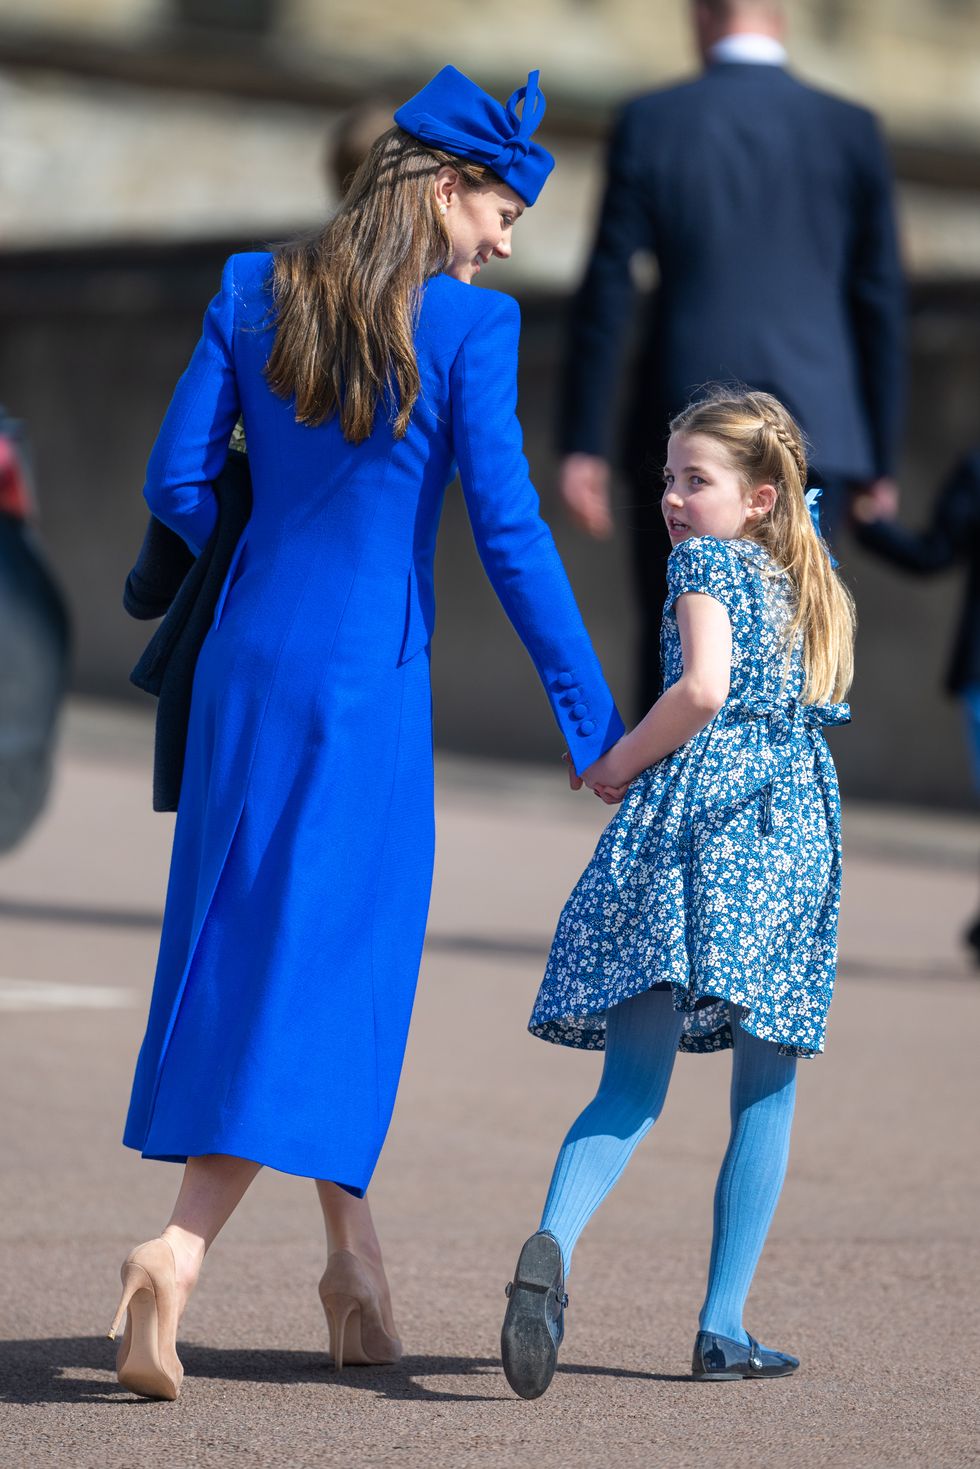 Kate Middleton And Princess Charlotte Matched In Bright Blue For Easter Service With Royals